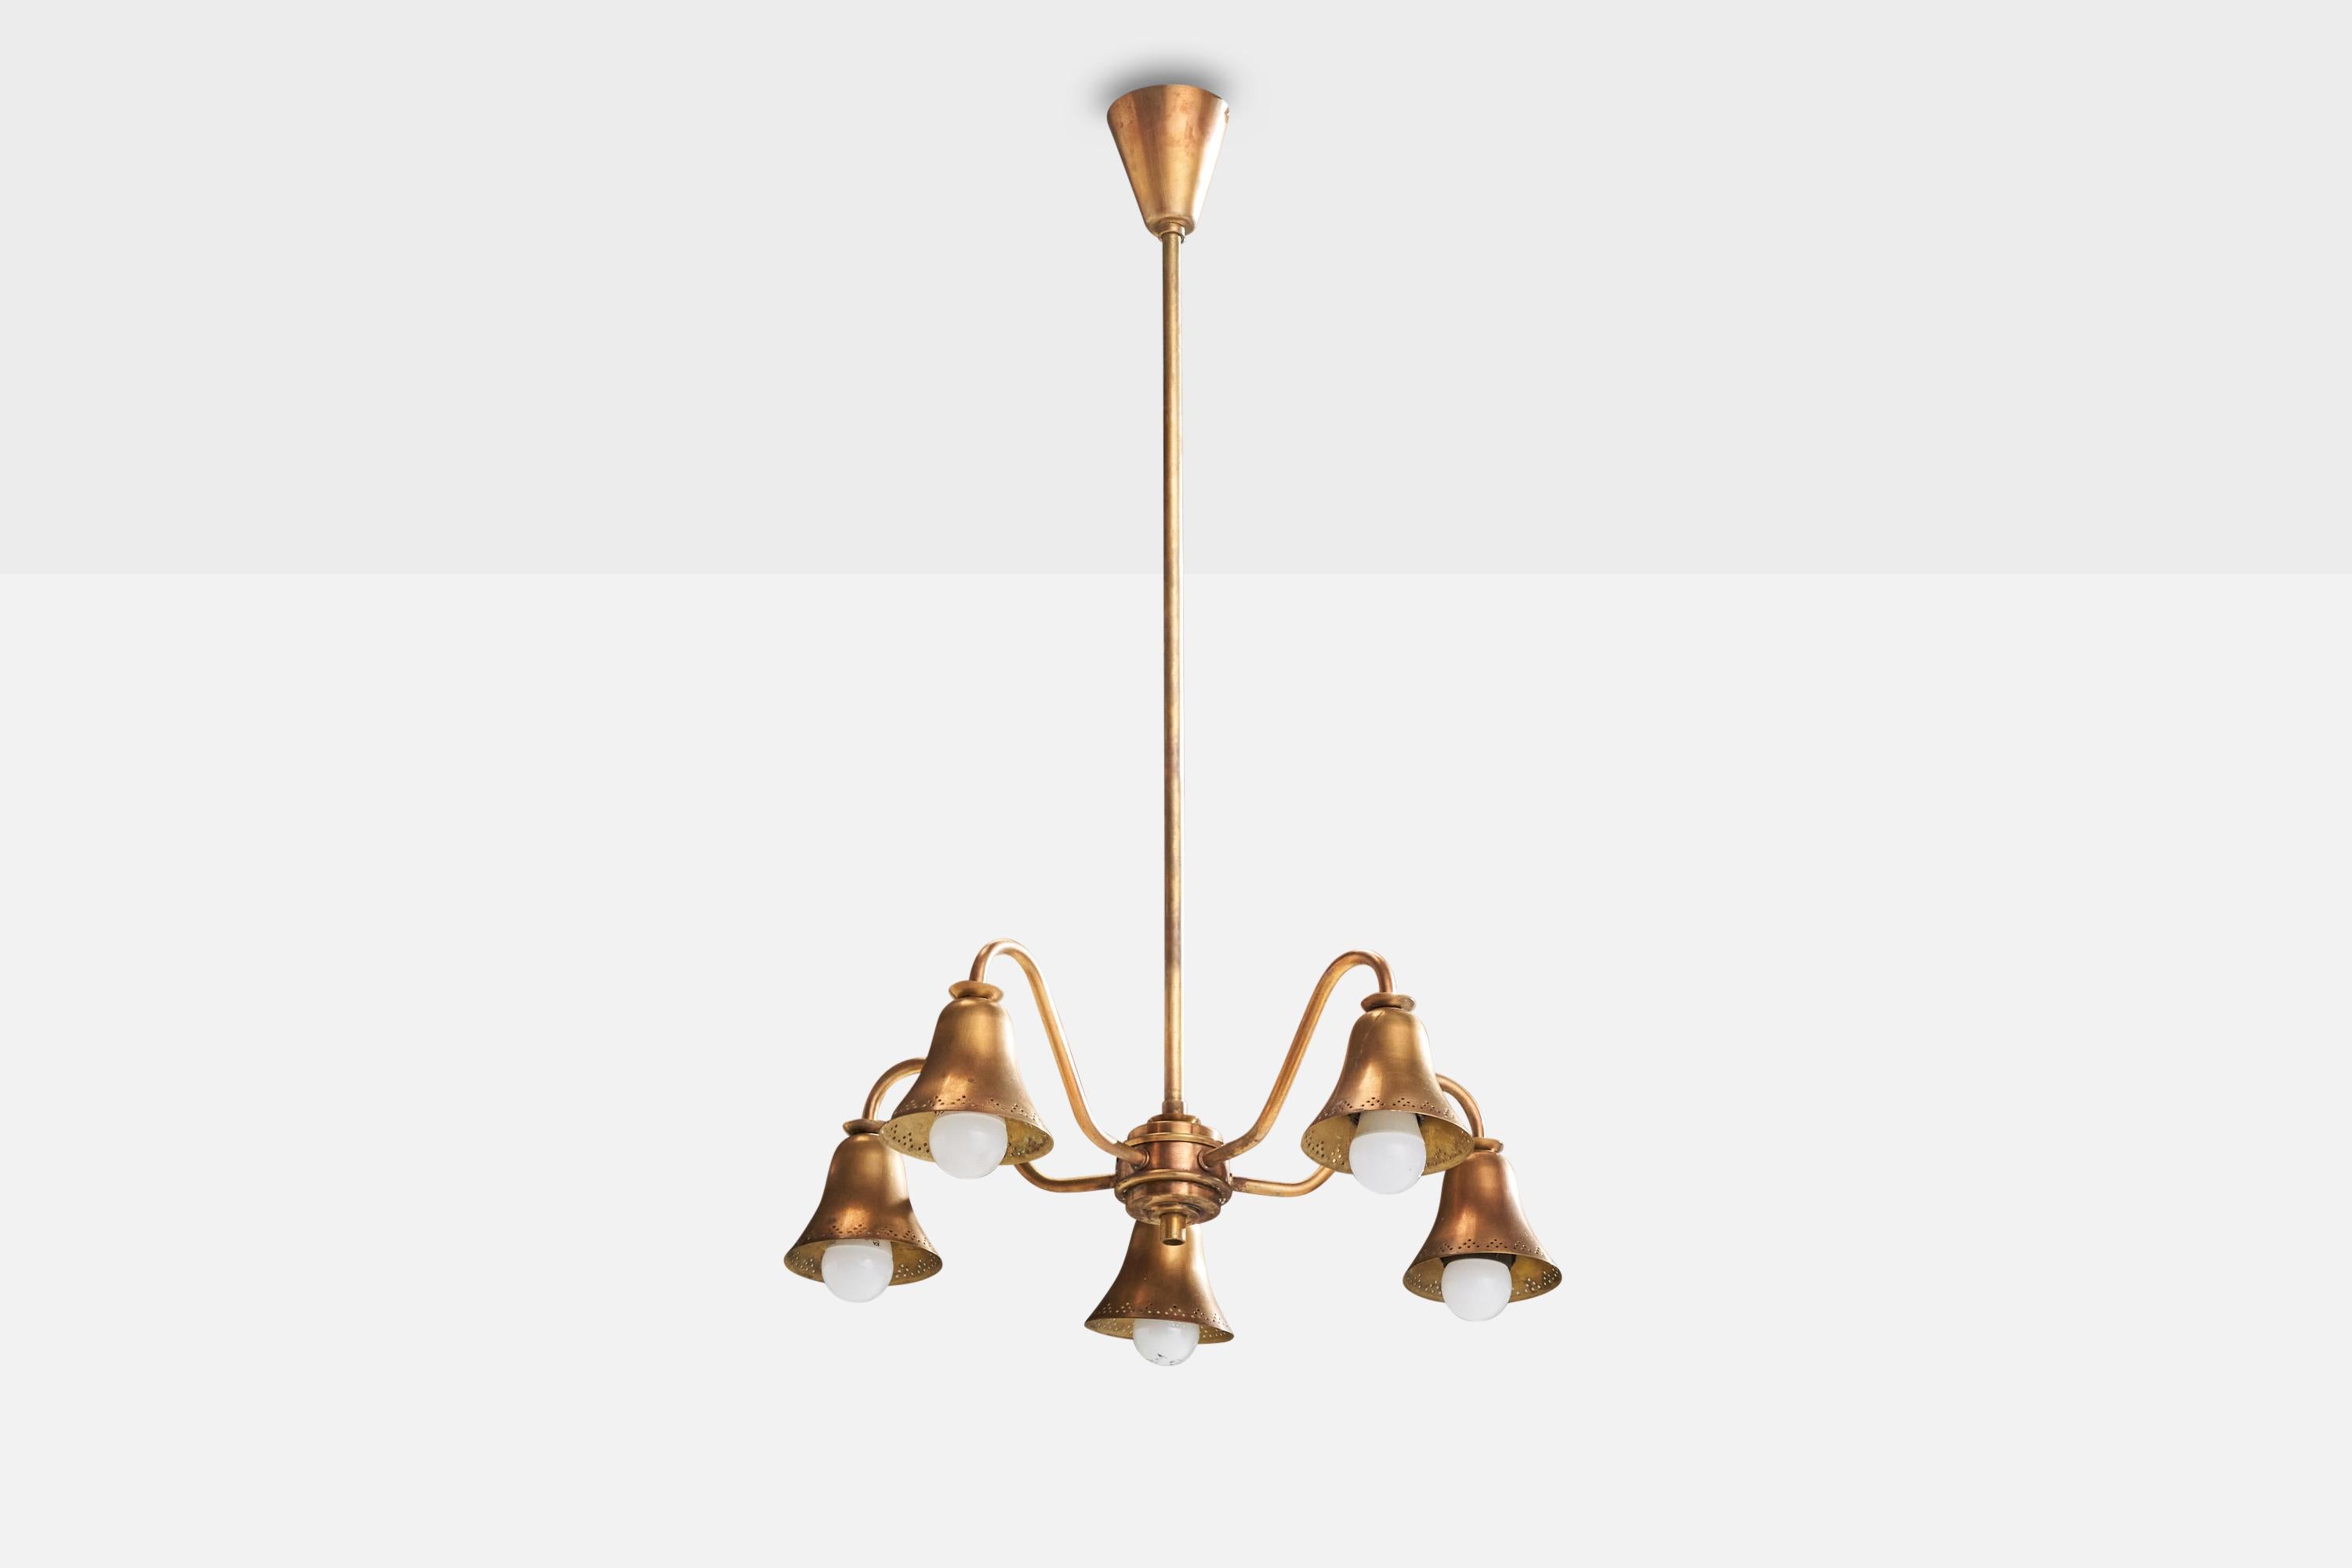 A copper chandelier designed and produced in Denmark, 1940s.

Dimensions of canopy (inches) : 3.51” H x 3.4” Diameter
Socket takes standard E-26 bulbs. 5 sockets.There is no maximum wattage stated on the fixture. All lighting will be converted for